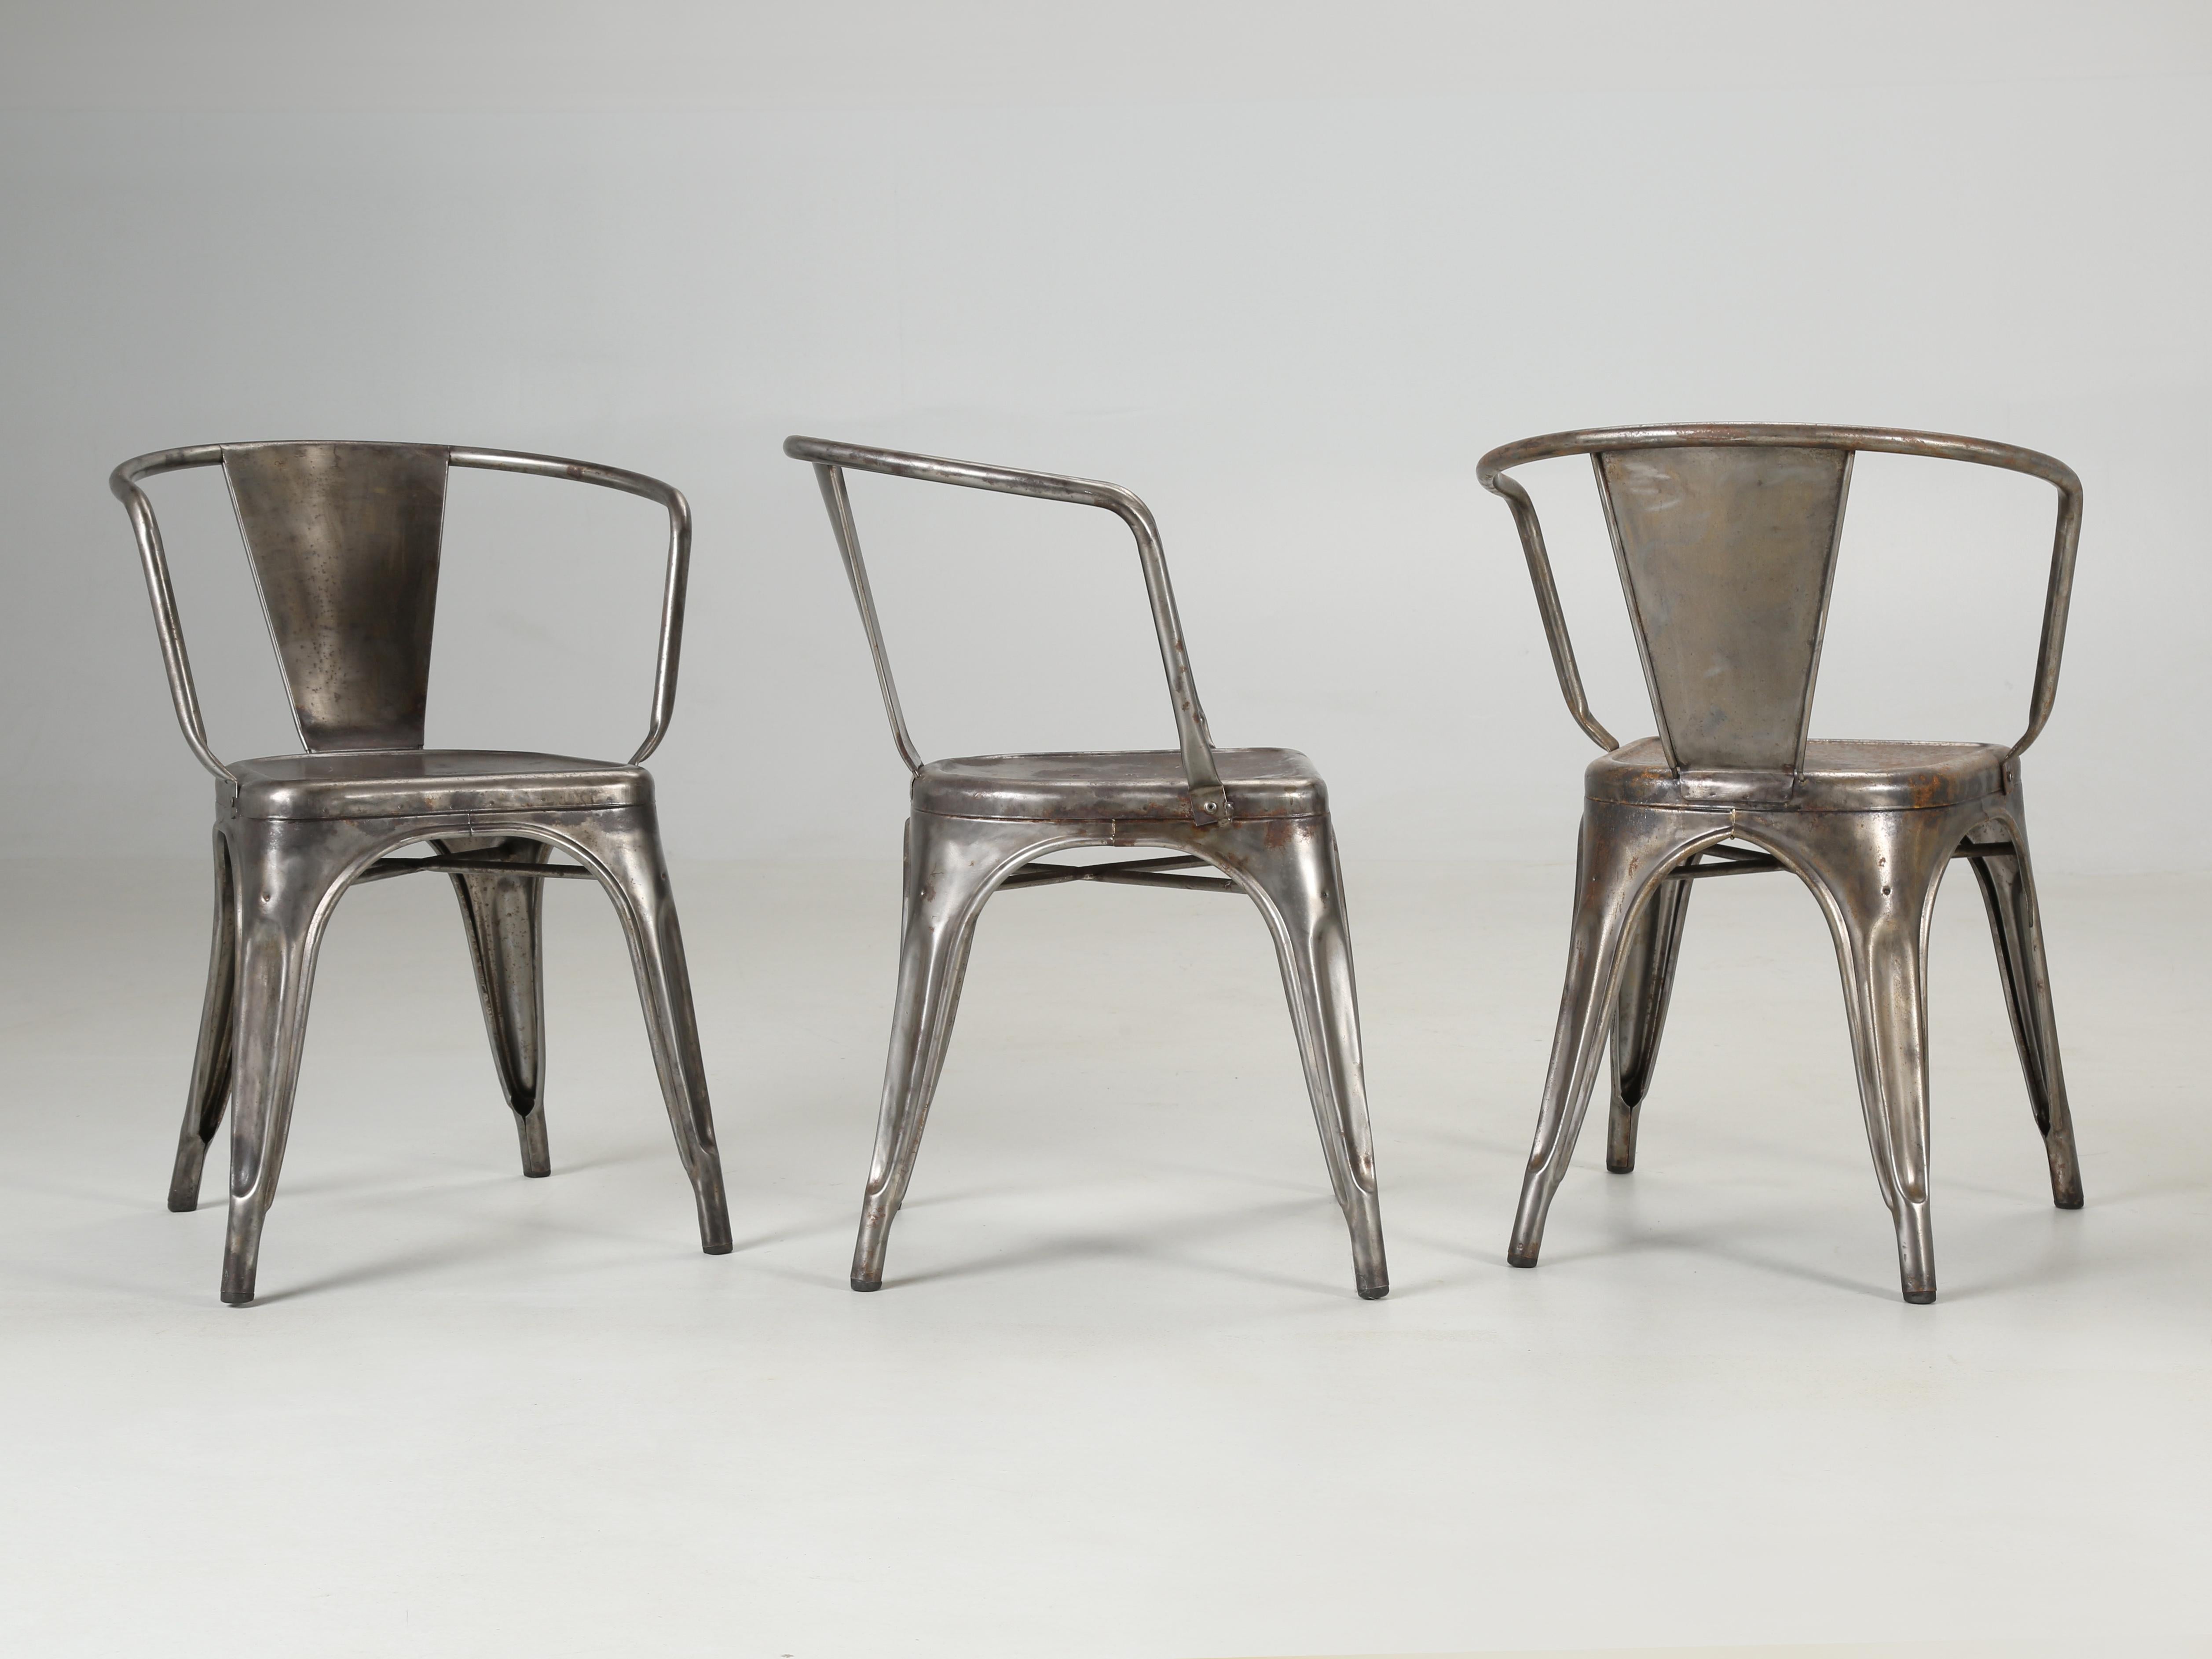 The infamous Tolix steel stacking chairs were invented by a French roofer named Xavier Pauchard. Soon as the public realized how convenient it was to stack your Tolix chairs, safely up to (12) high, they became an immediate success. In short order